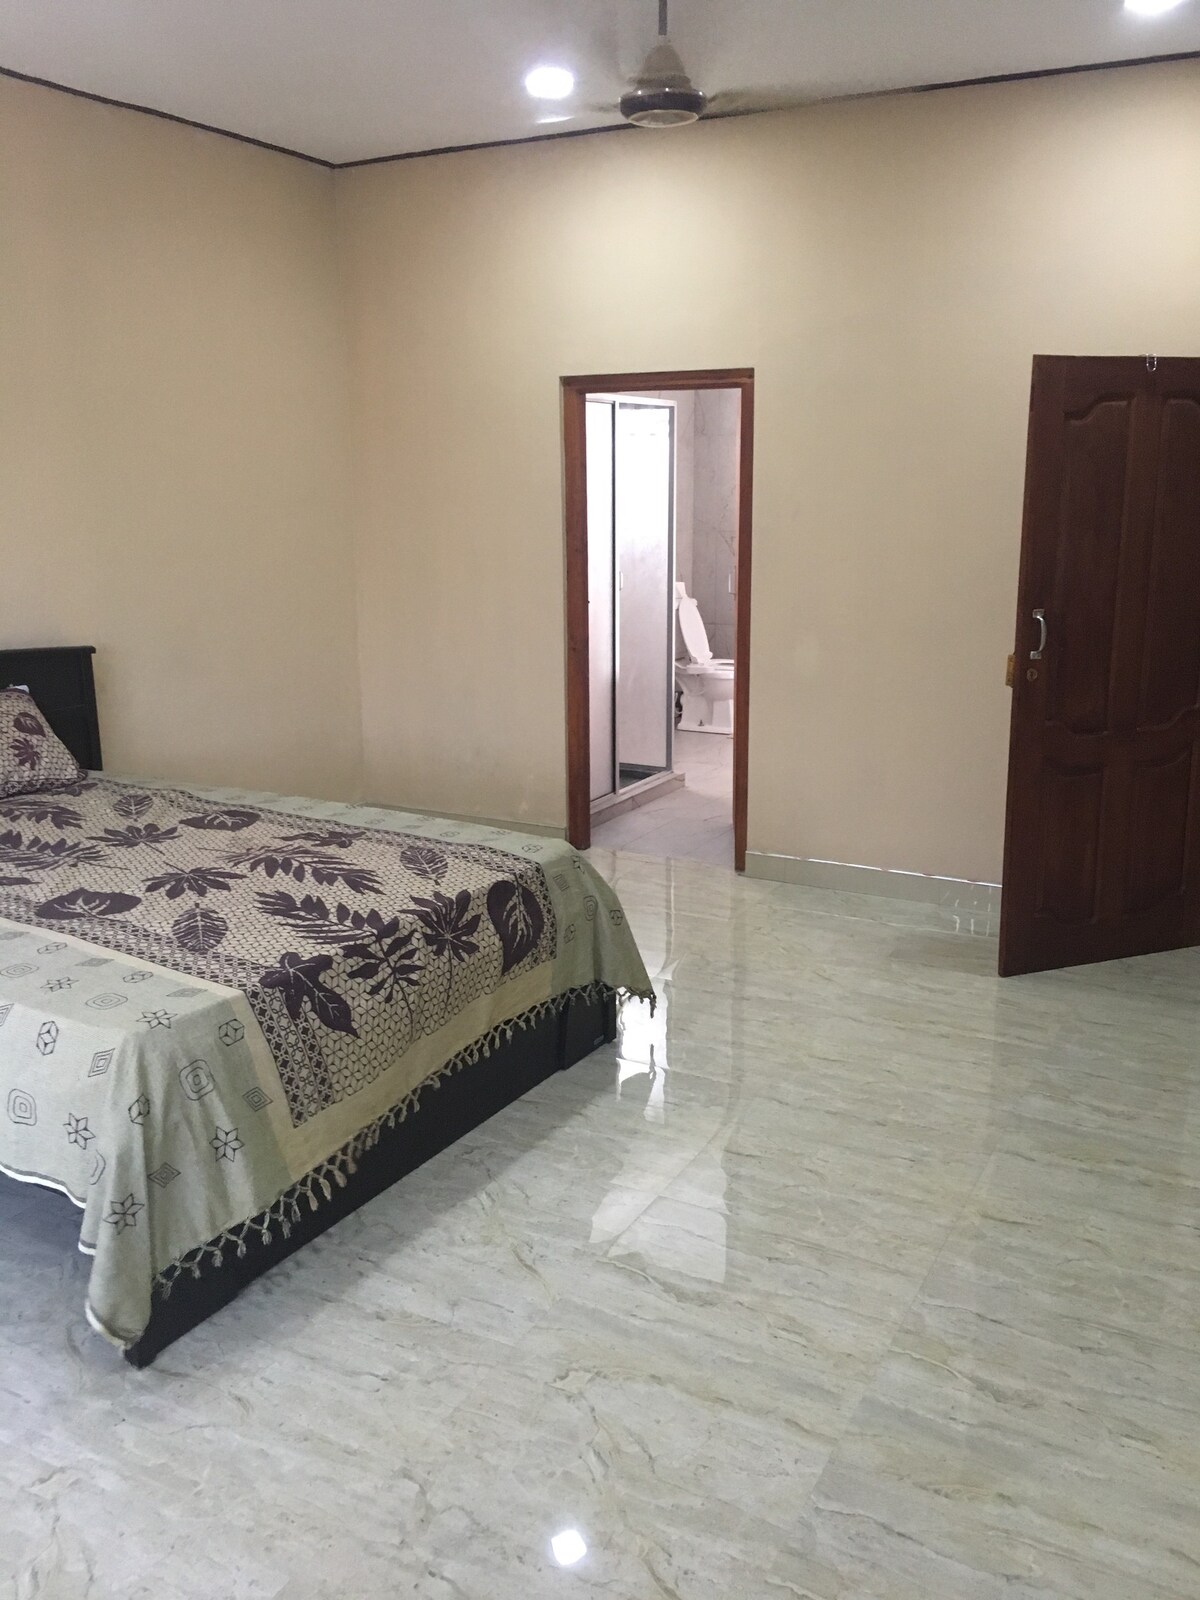 Most Spacious, Luxurious கனி Guest Suite in VVT